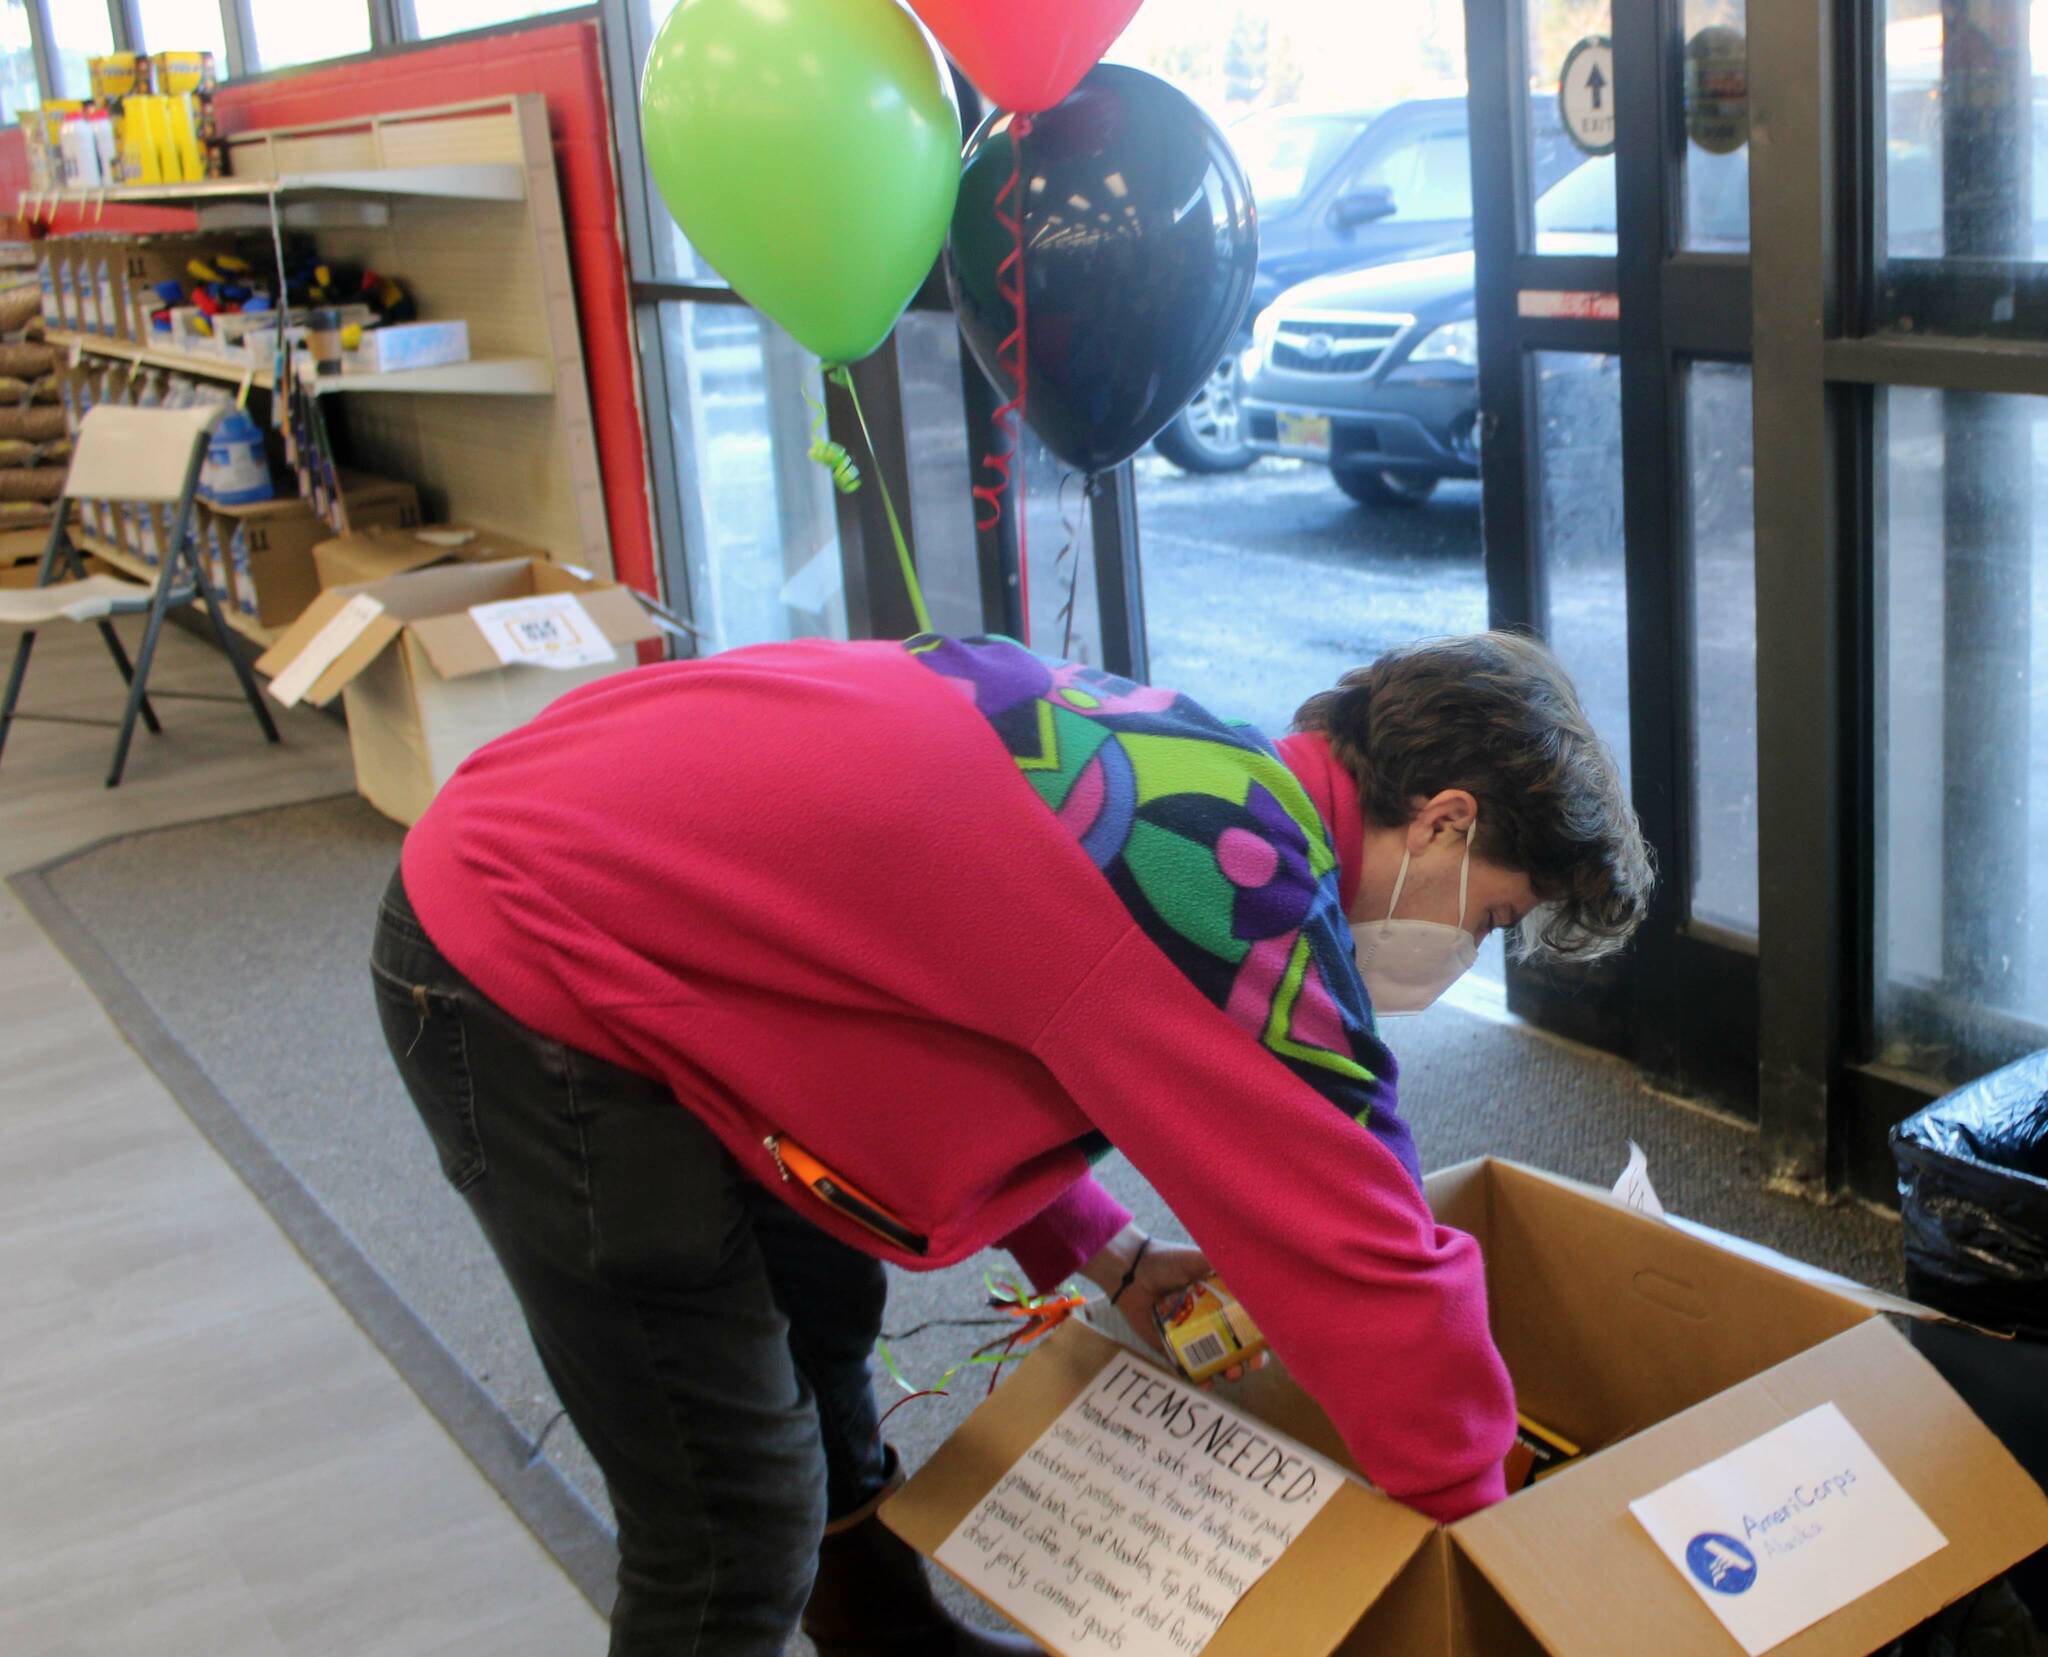 Abe Lahr, an AmeriCorps member, adds donations to the collection box at Super Bear on Jan. 17. Lahr was part of a team that collected food and household items in honor of Martin Luther King Jr. Day. (Dana Zigmund/Juneau Empire)